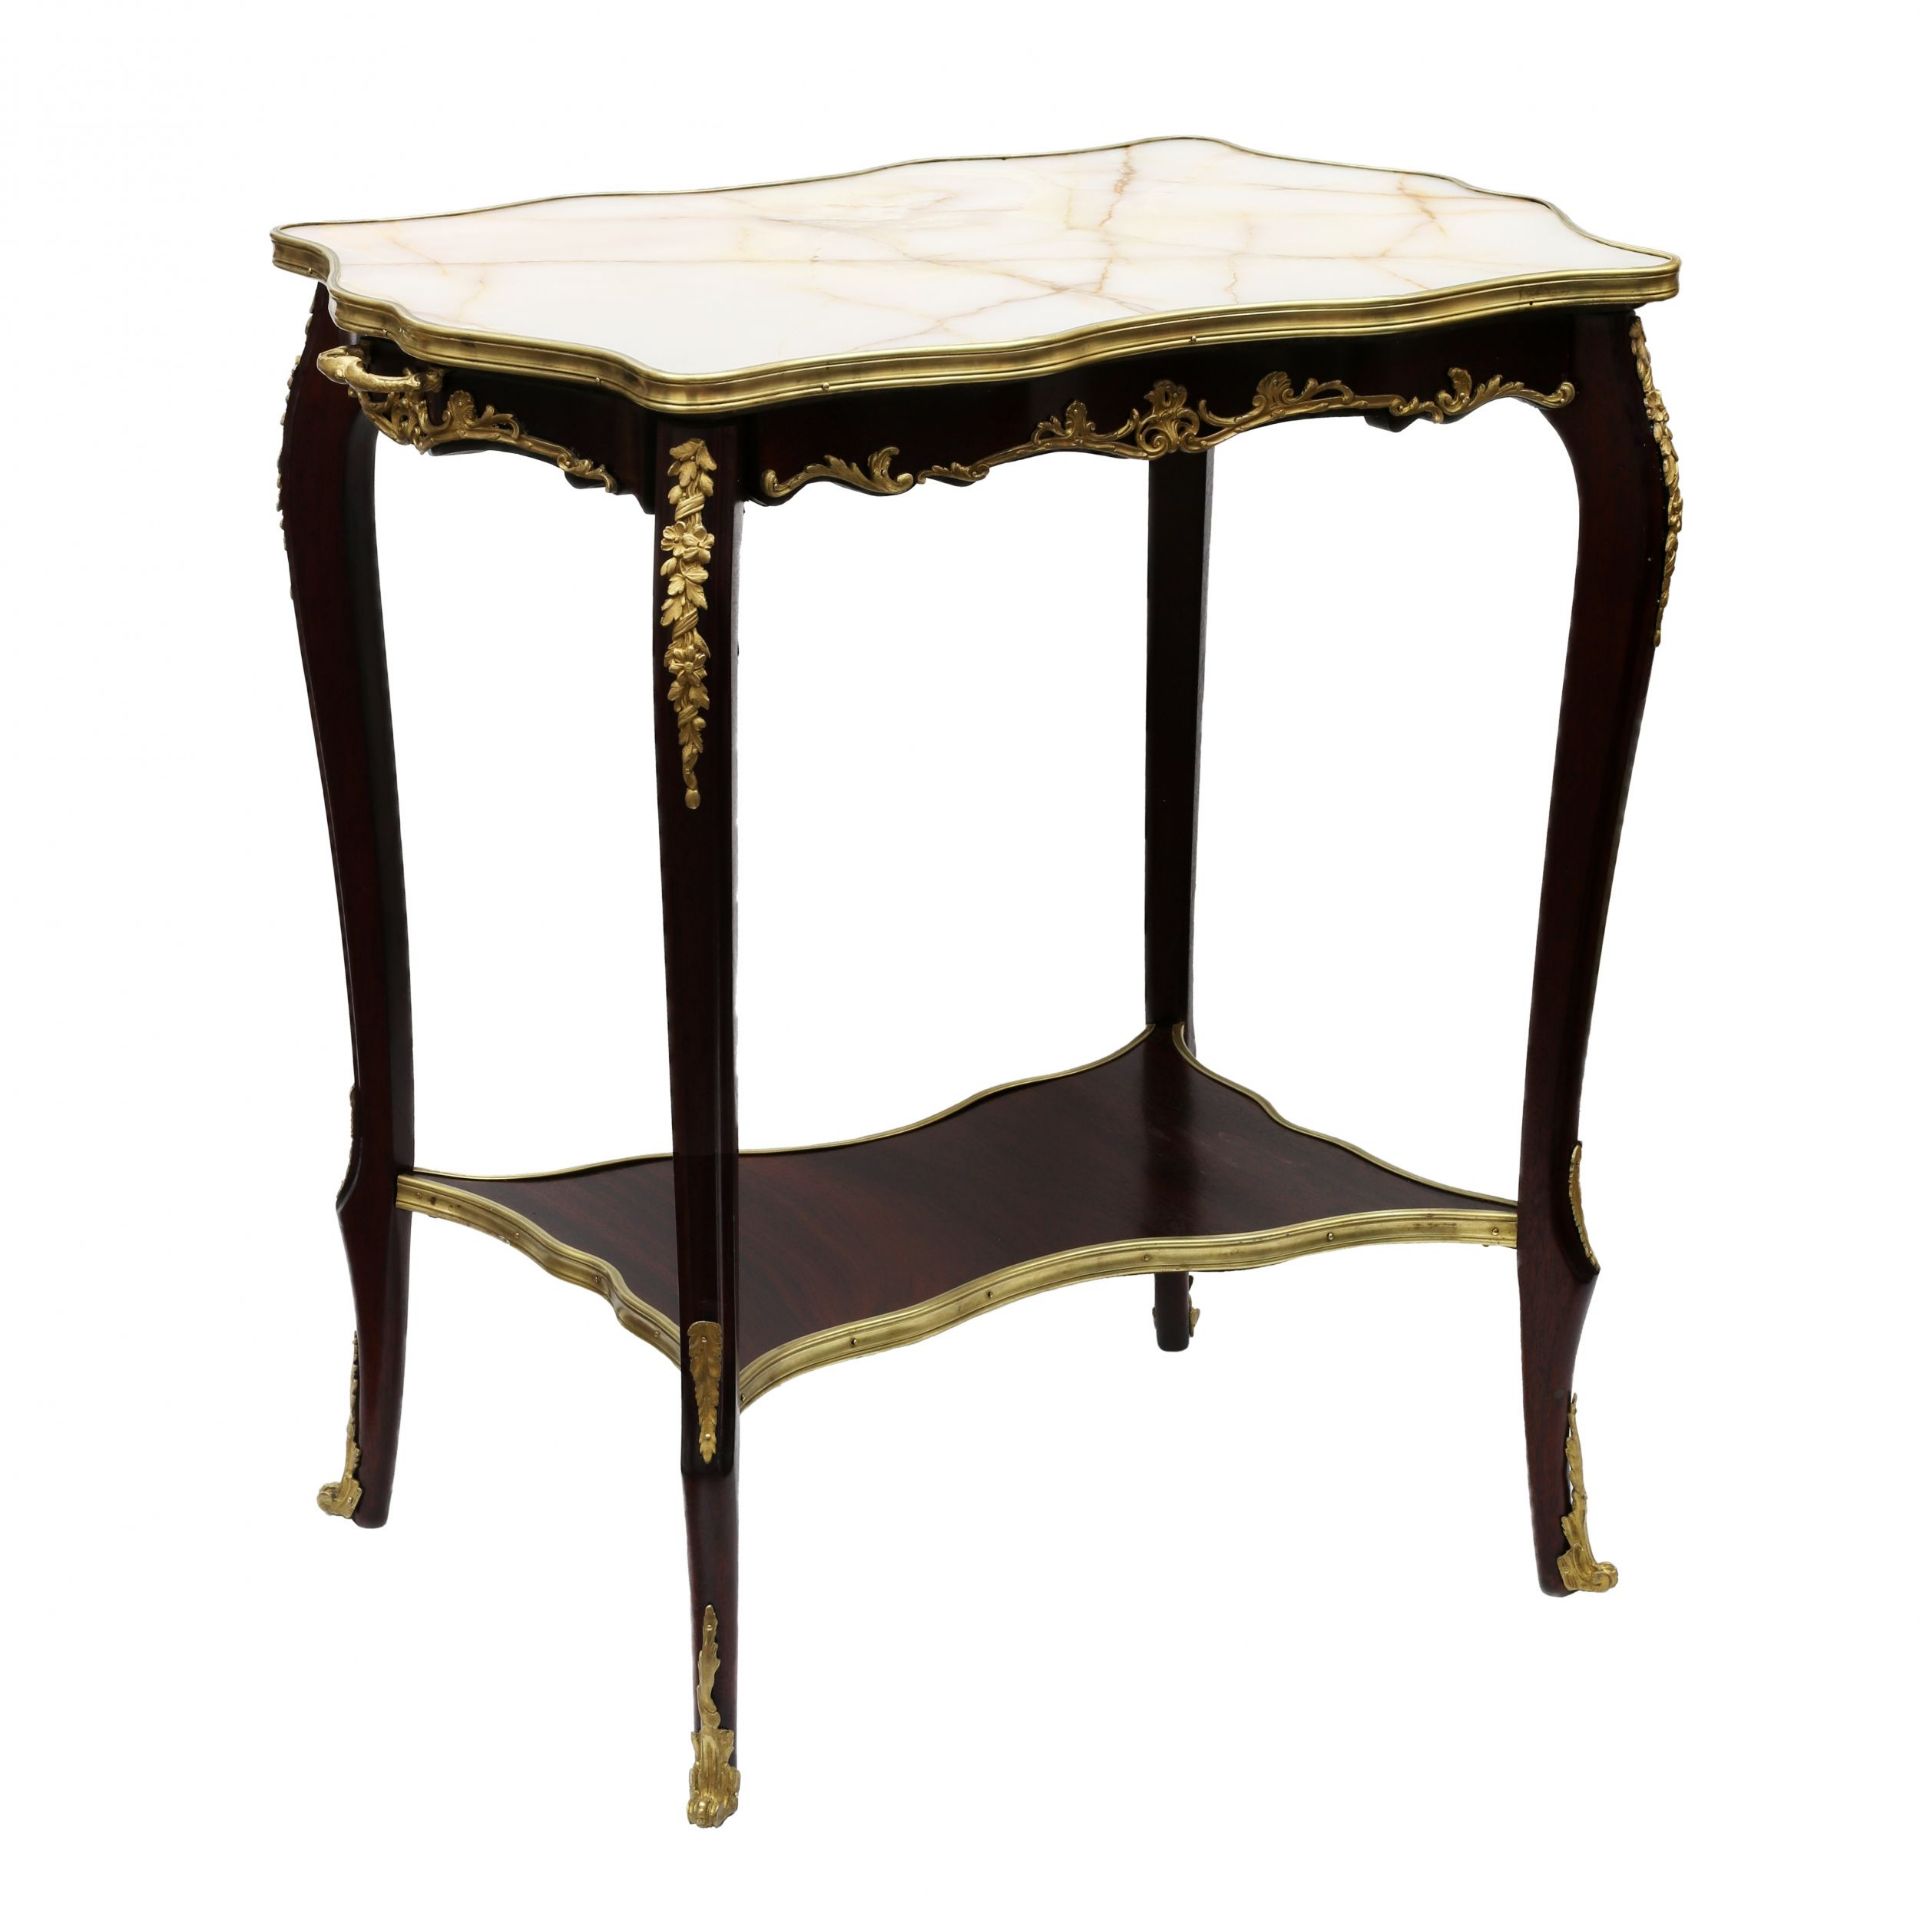 Serving table mahogany, gilded bronze with a marble top of the turn of the 19th and 20th centuries. - Image 3 of 5